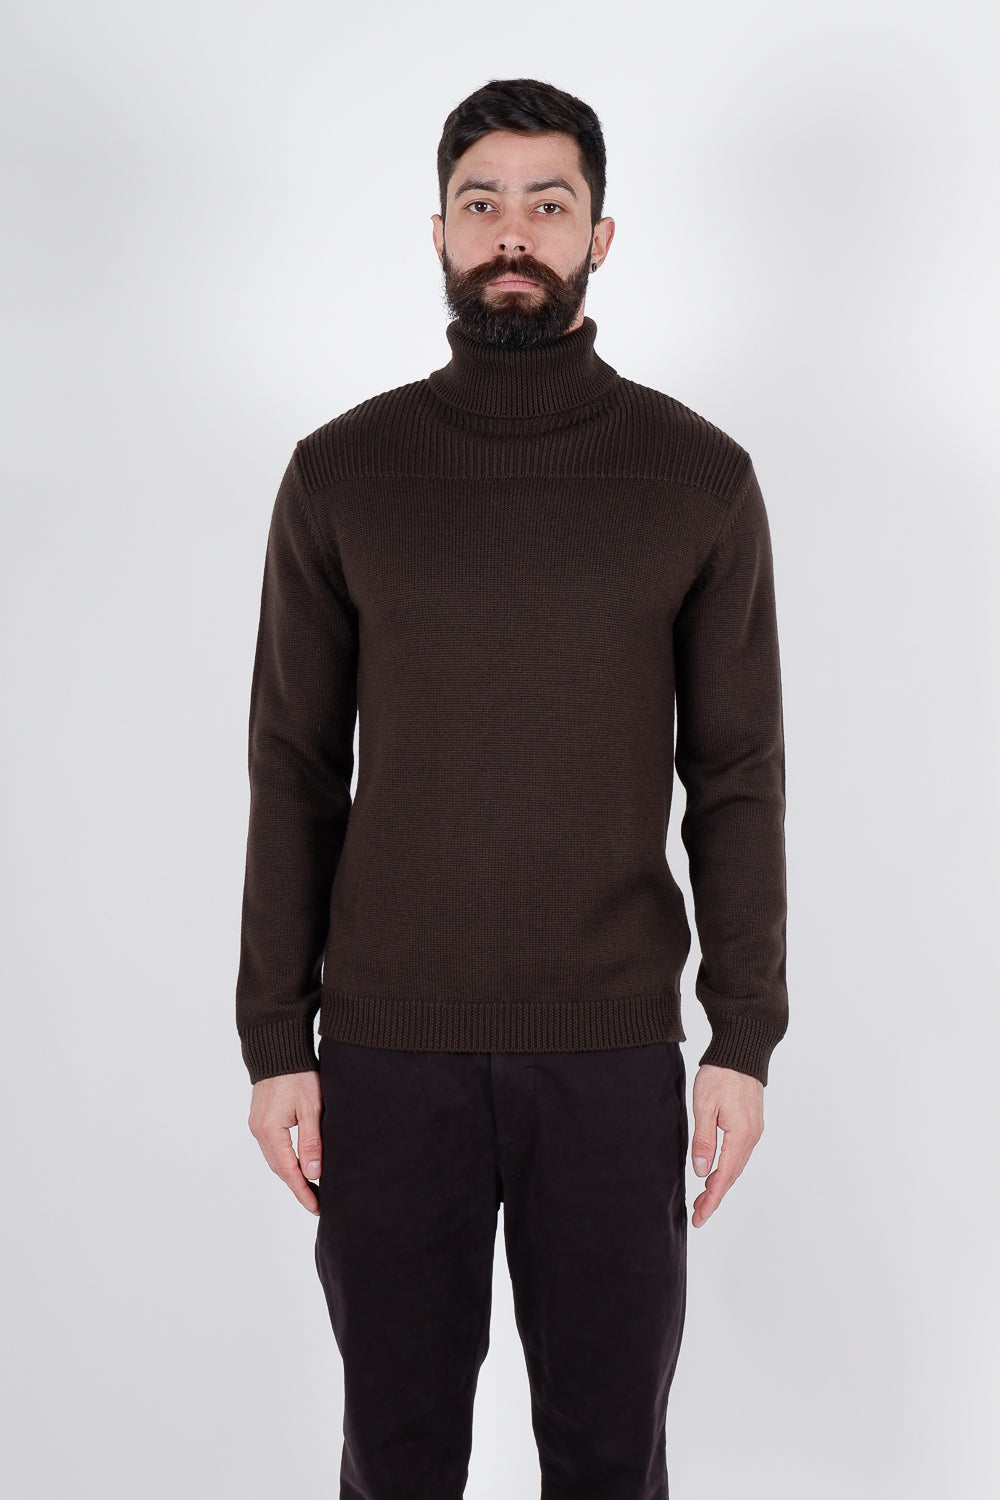 Buy the Daniele Fiesoli Textured Turtle Neck Brown at Intro. Spend £50 for free UK delivery. Official stockists. We ship worldwide.